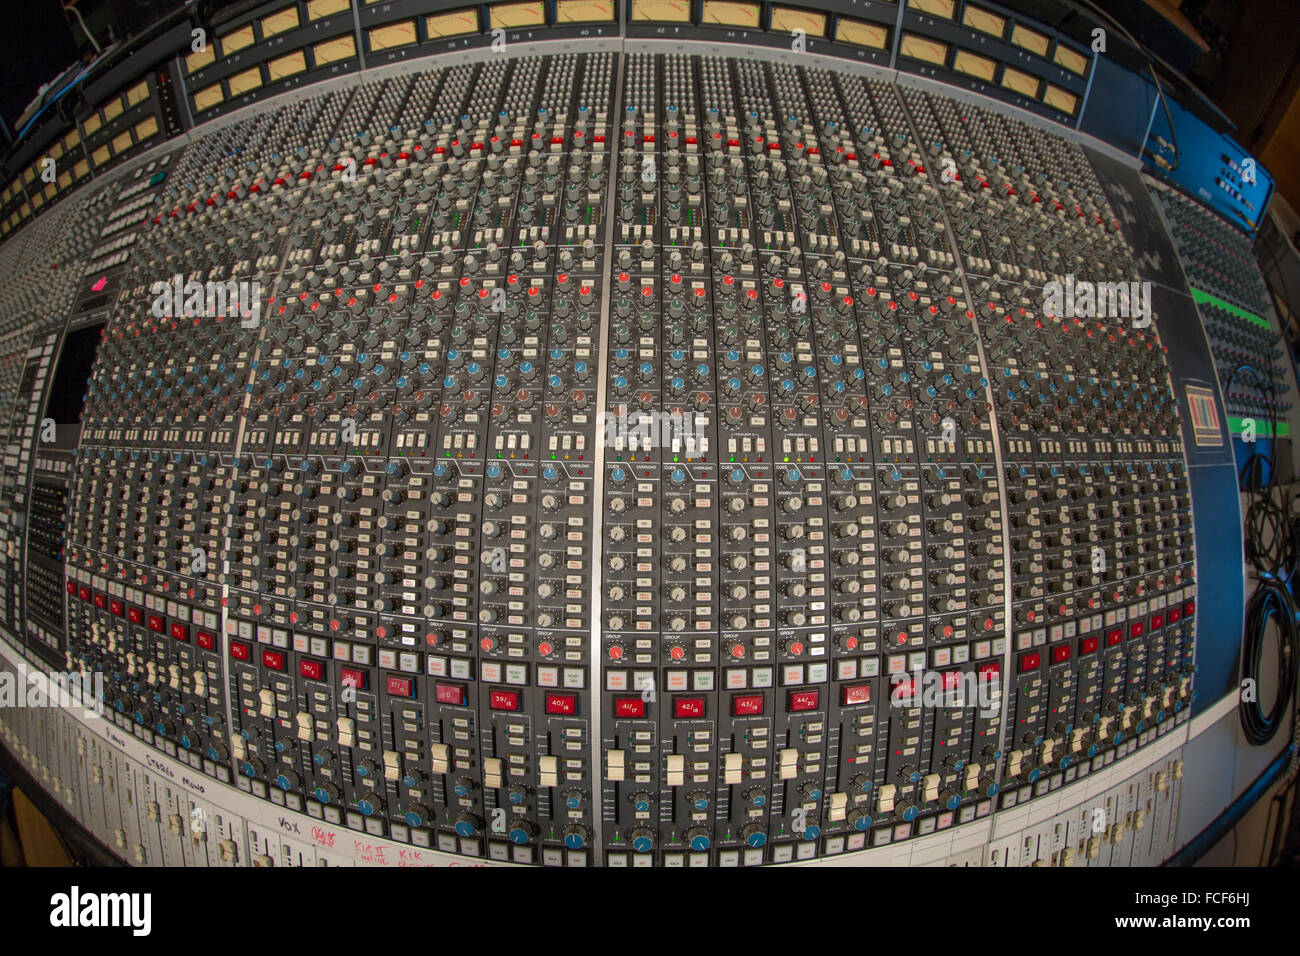 Above Fish Eye View Of Ssl E Series Sound Mixing Desk Showing